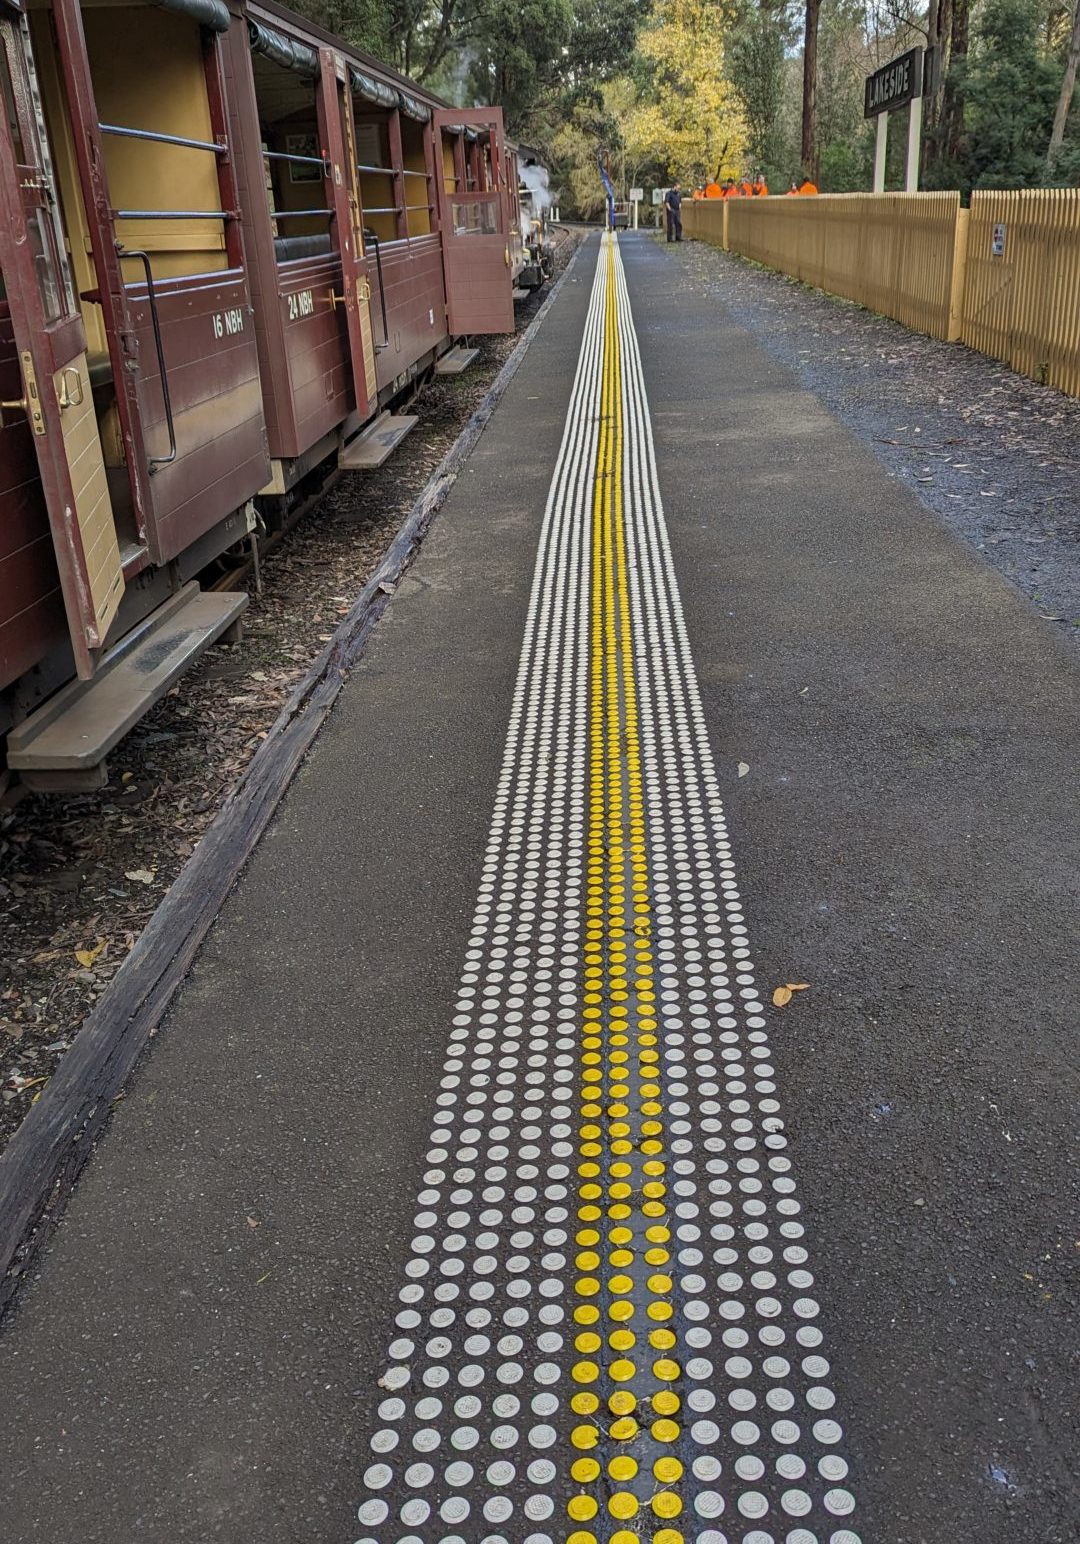 Tactile Ground Surface Indicators At Puffing Billy's Lakeside Station Platform With Open Side Carriages Visible.